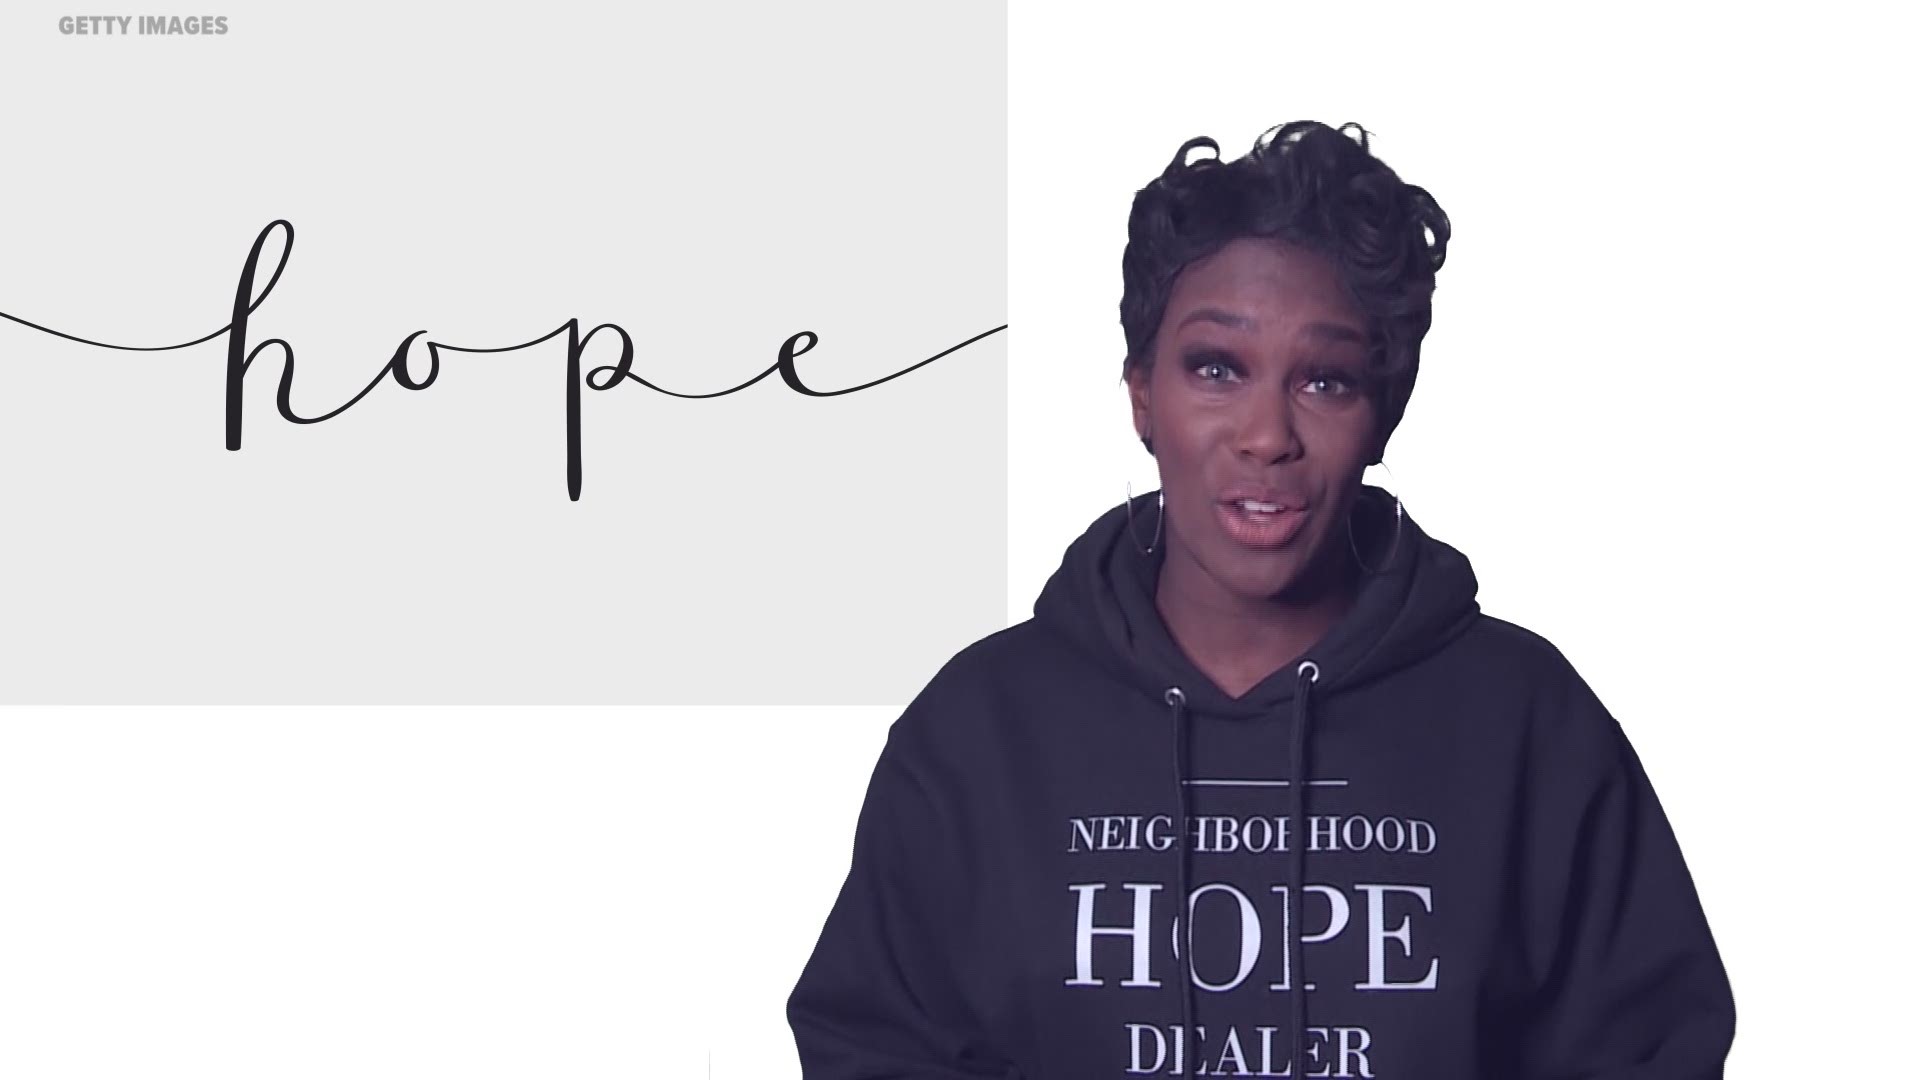 Adrienne Broaddus shows us what Minnesota's definition of hope is.